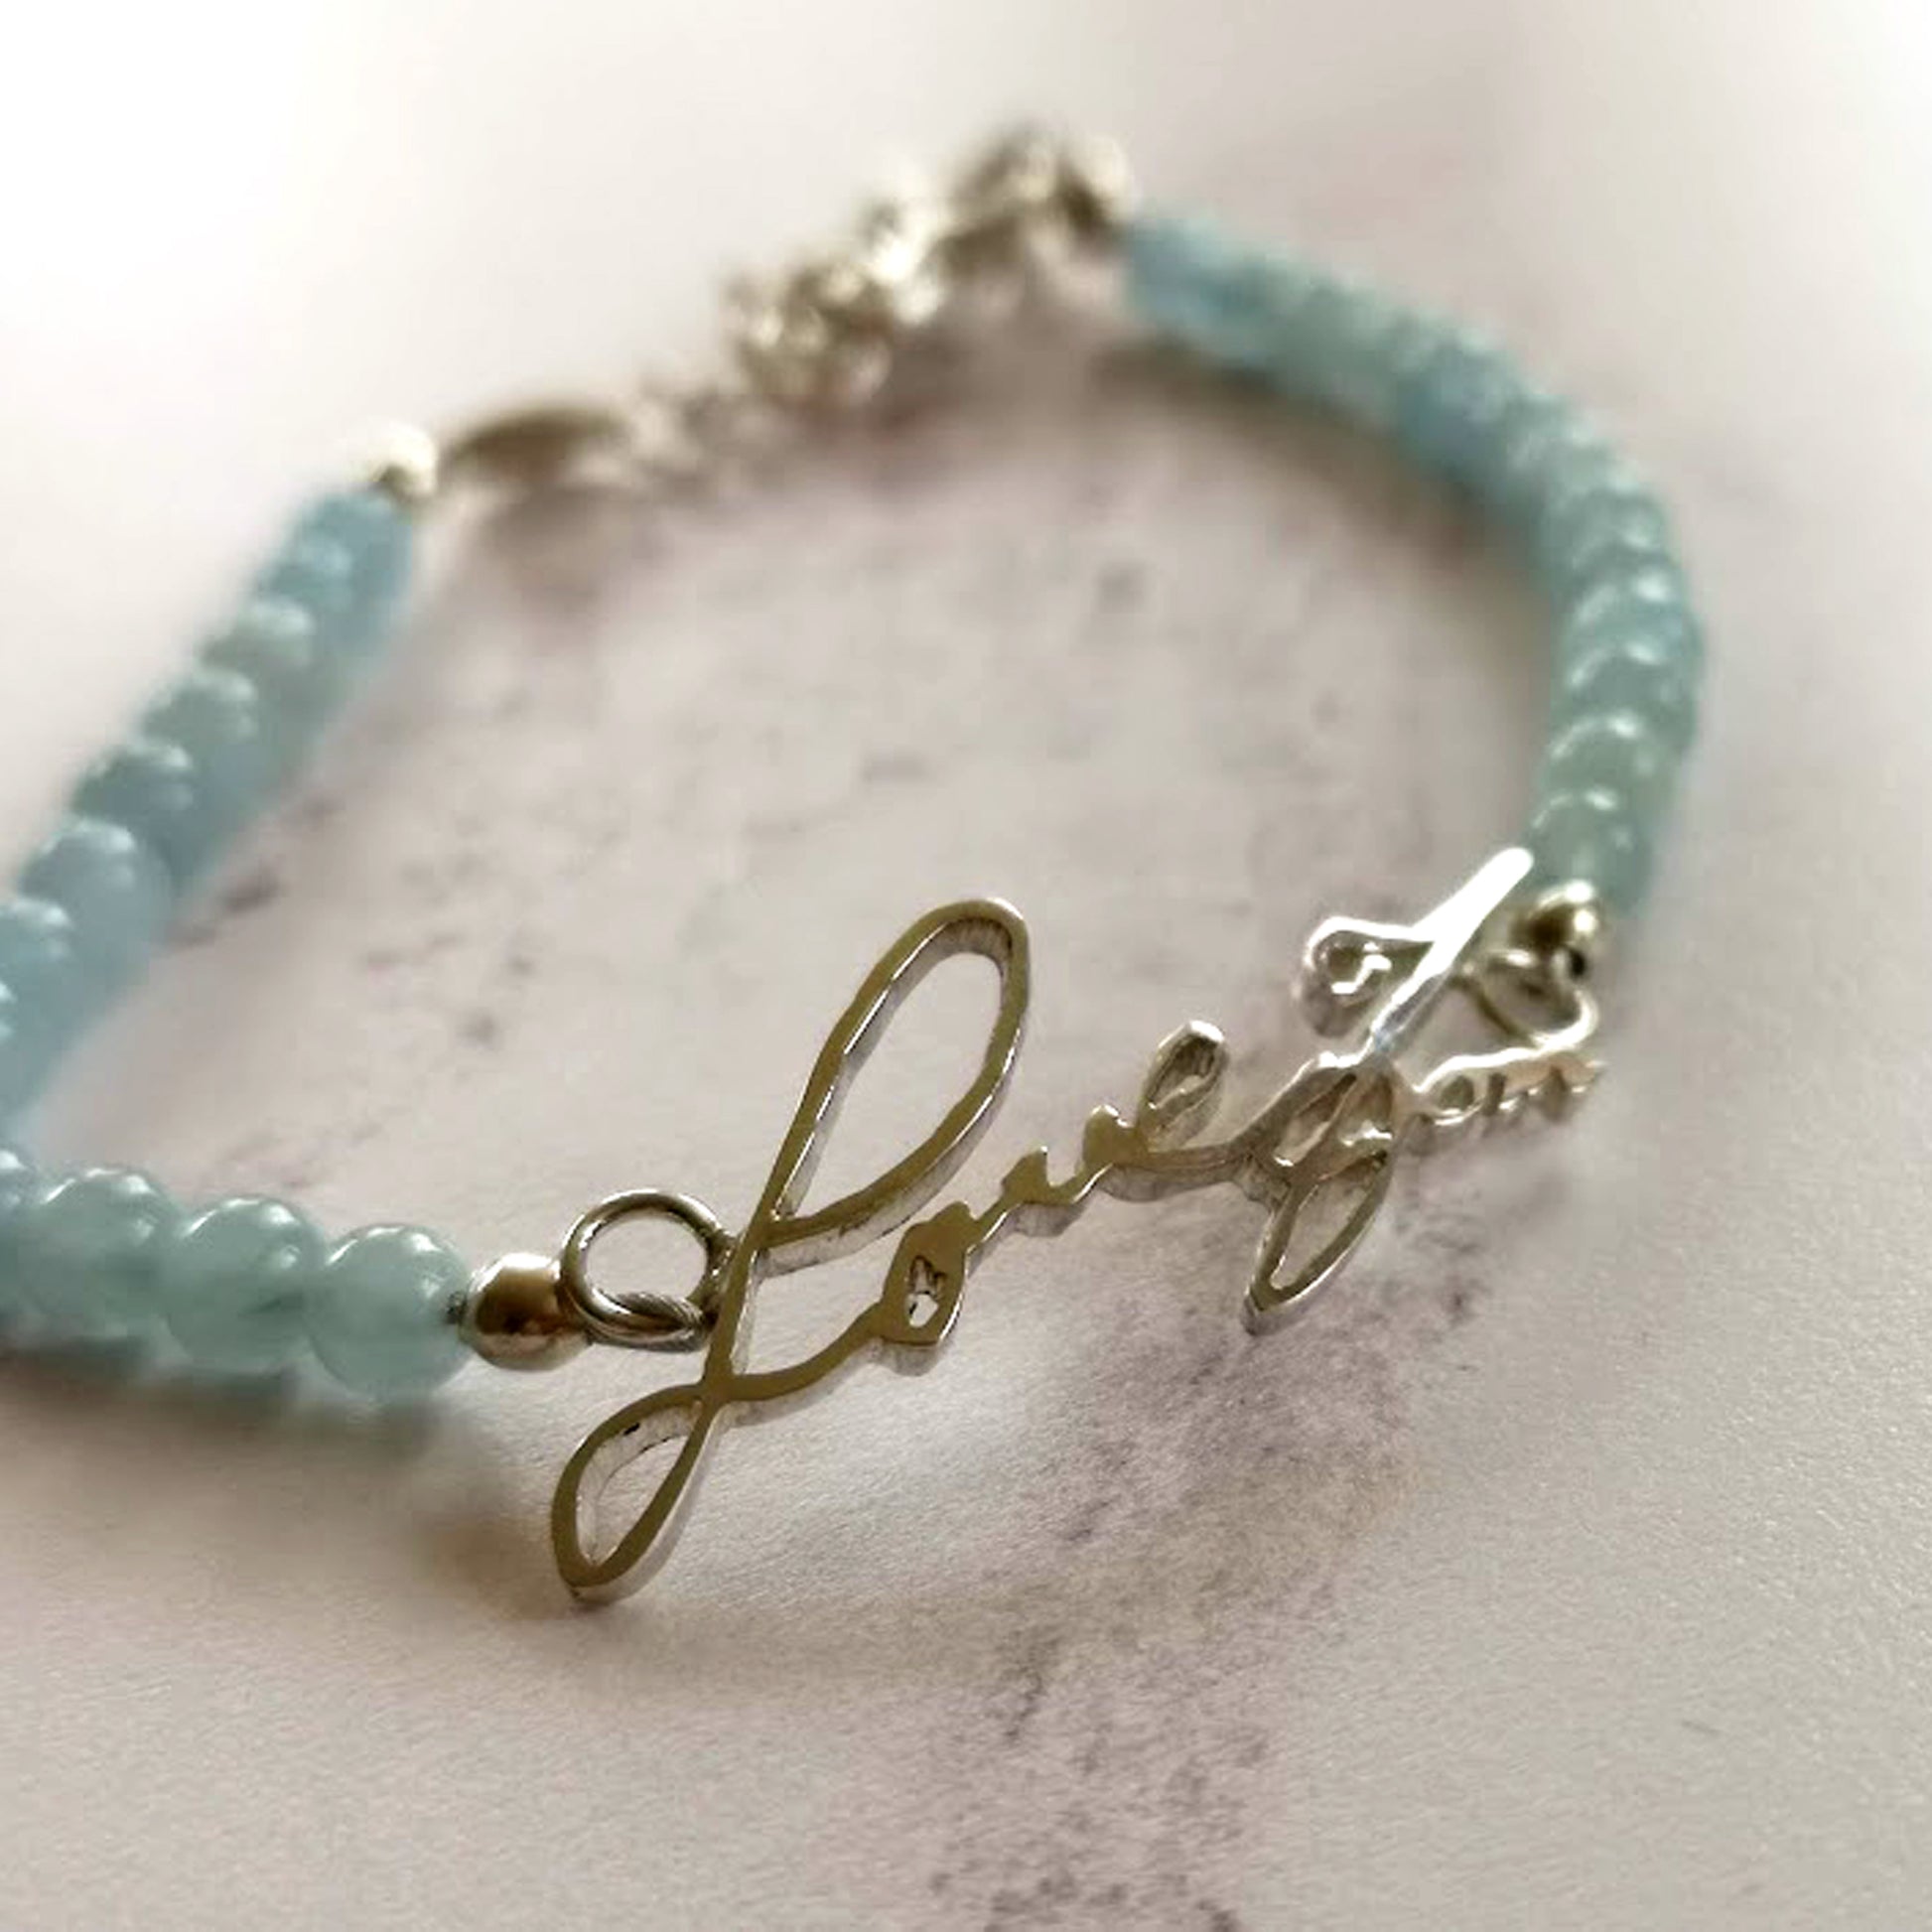 Aquamarine bracelet with your loved ones handwriting